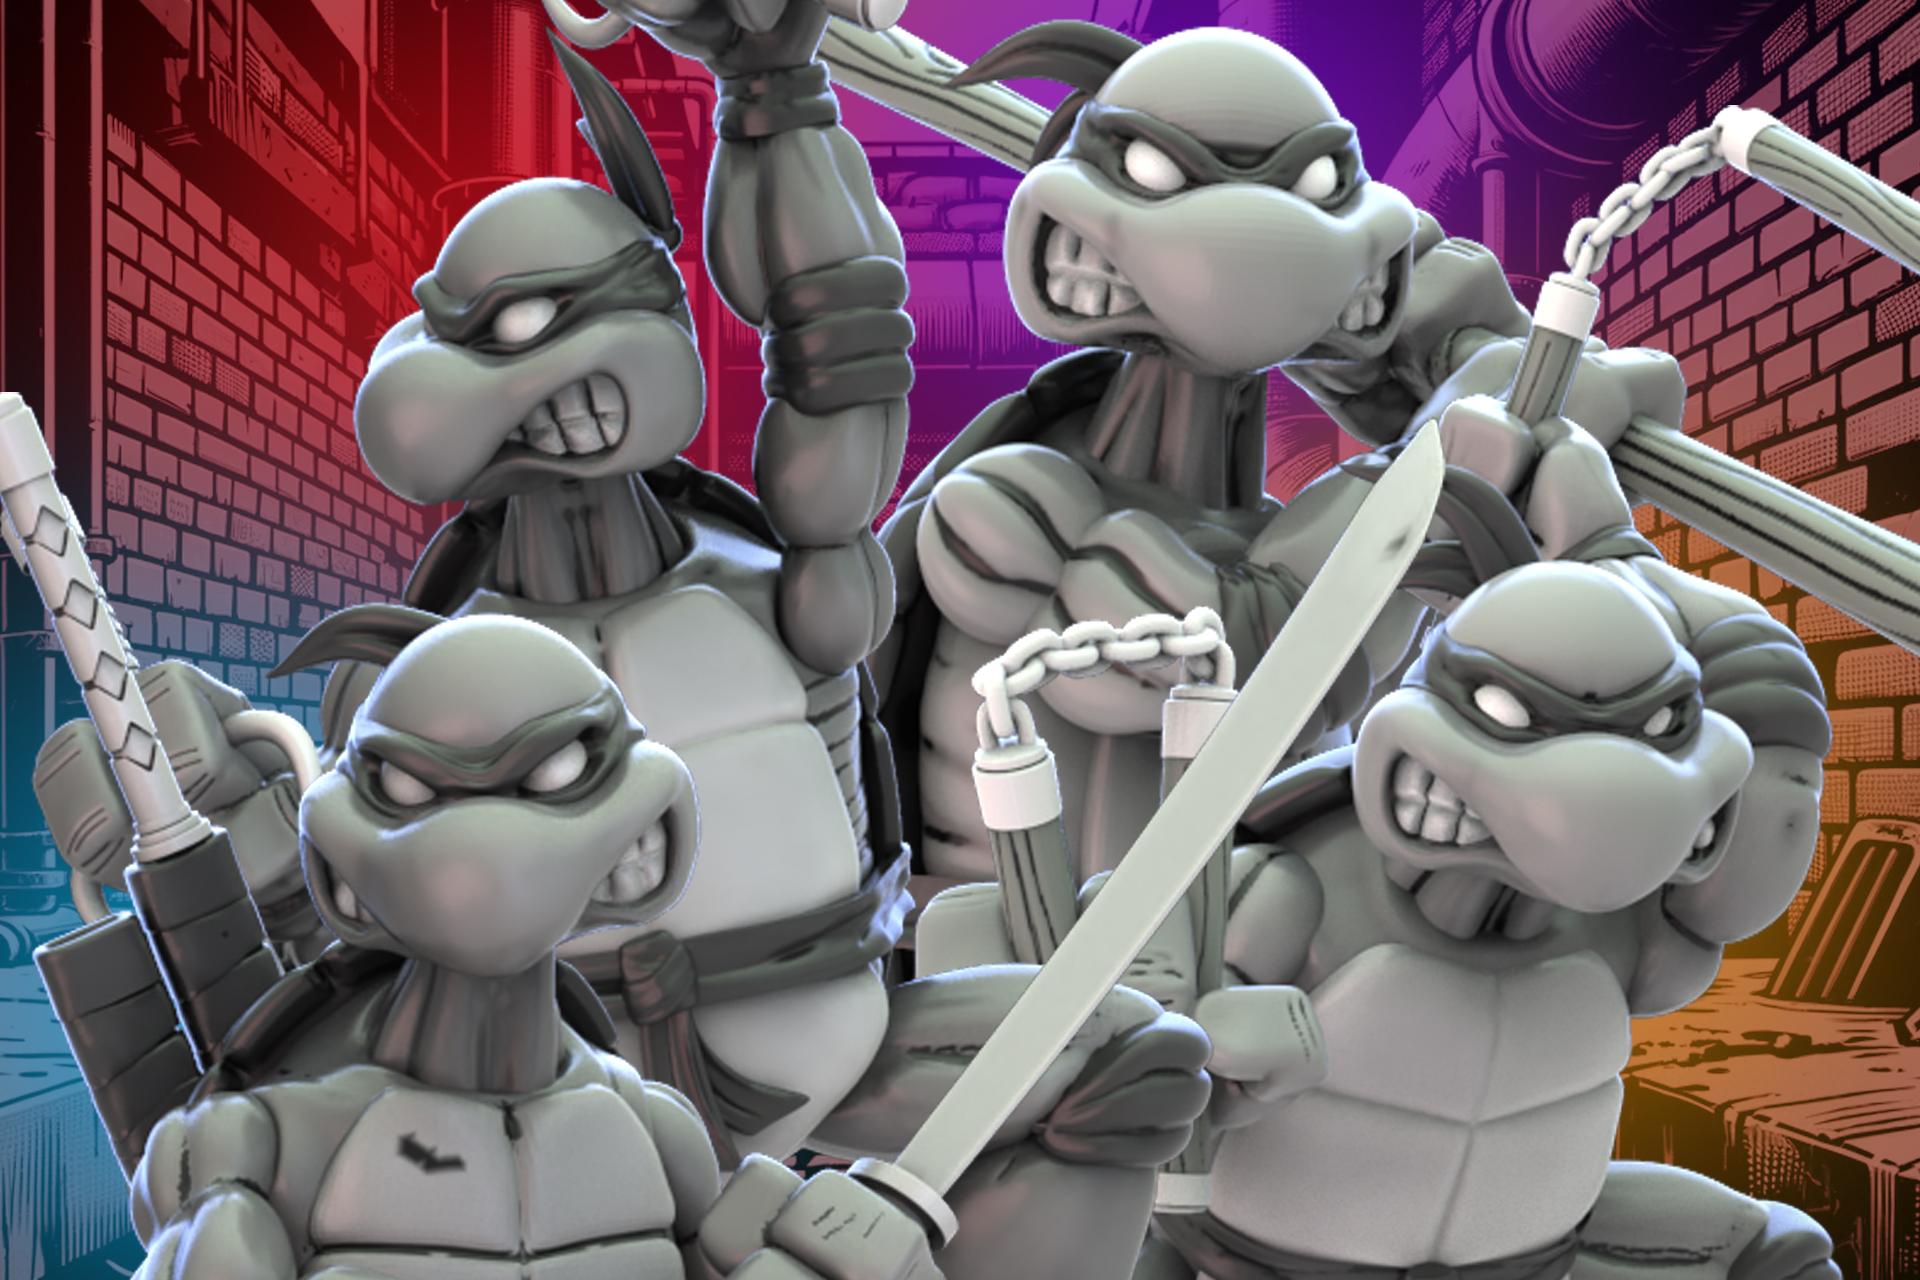 Exciting News from Patenaude Prints: Celebrating 40 Years of TMNT!